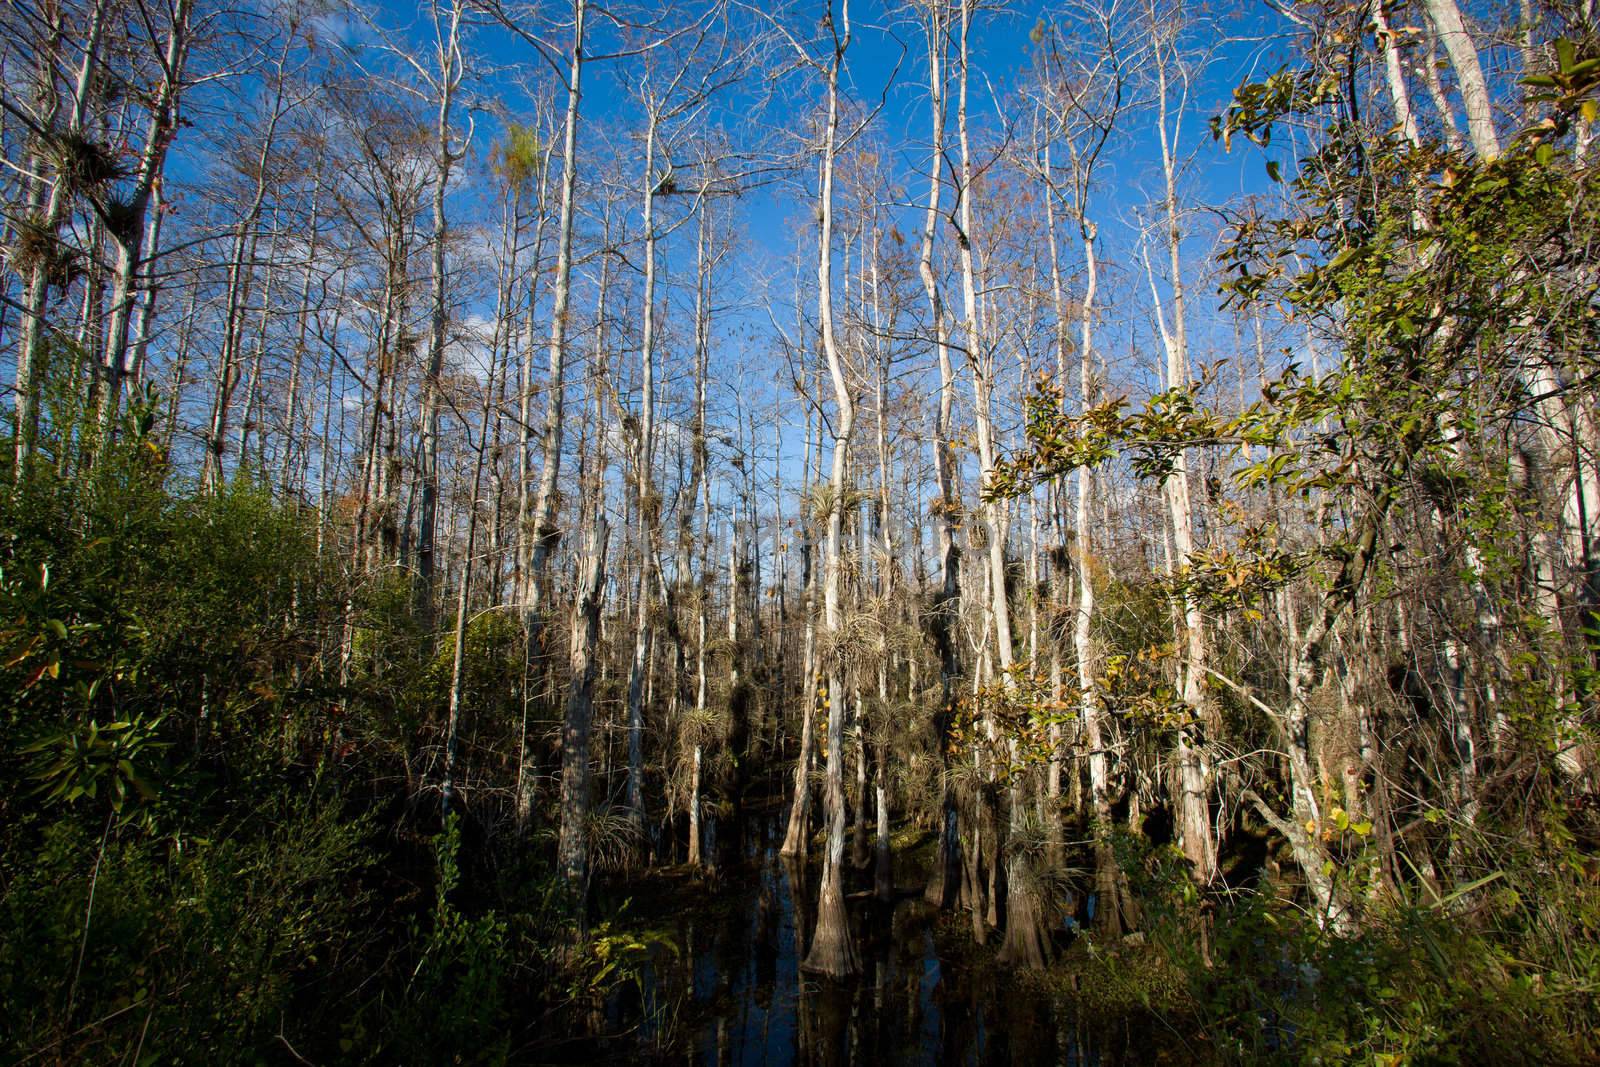 Cypress and other vegetation from the swamp of the Eveglades National Park in Florida